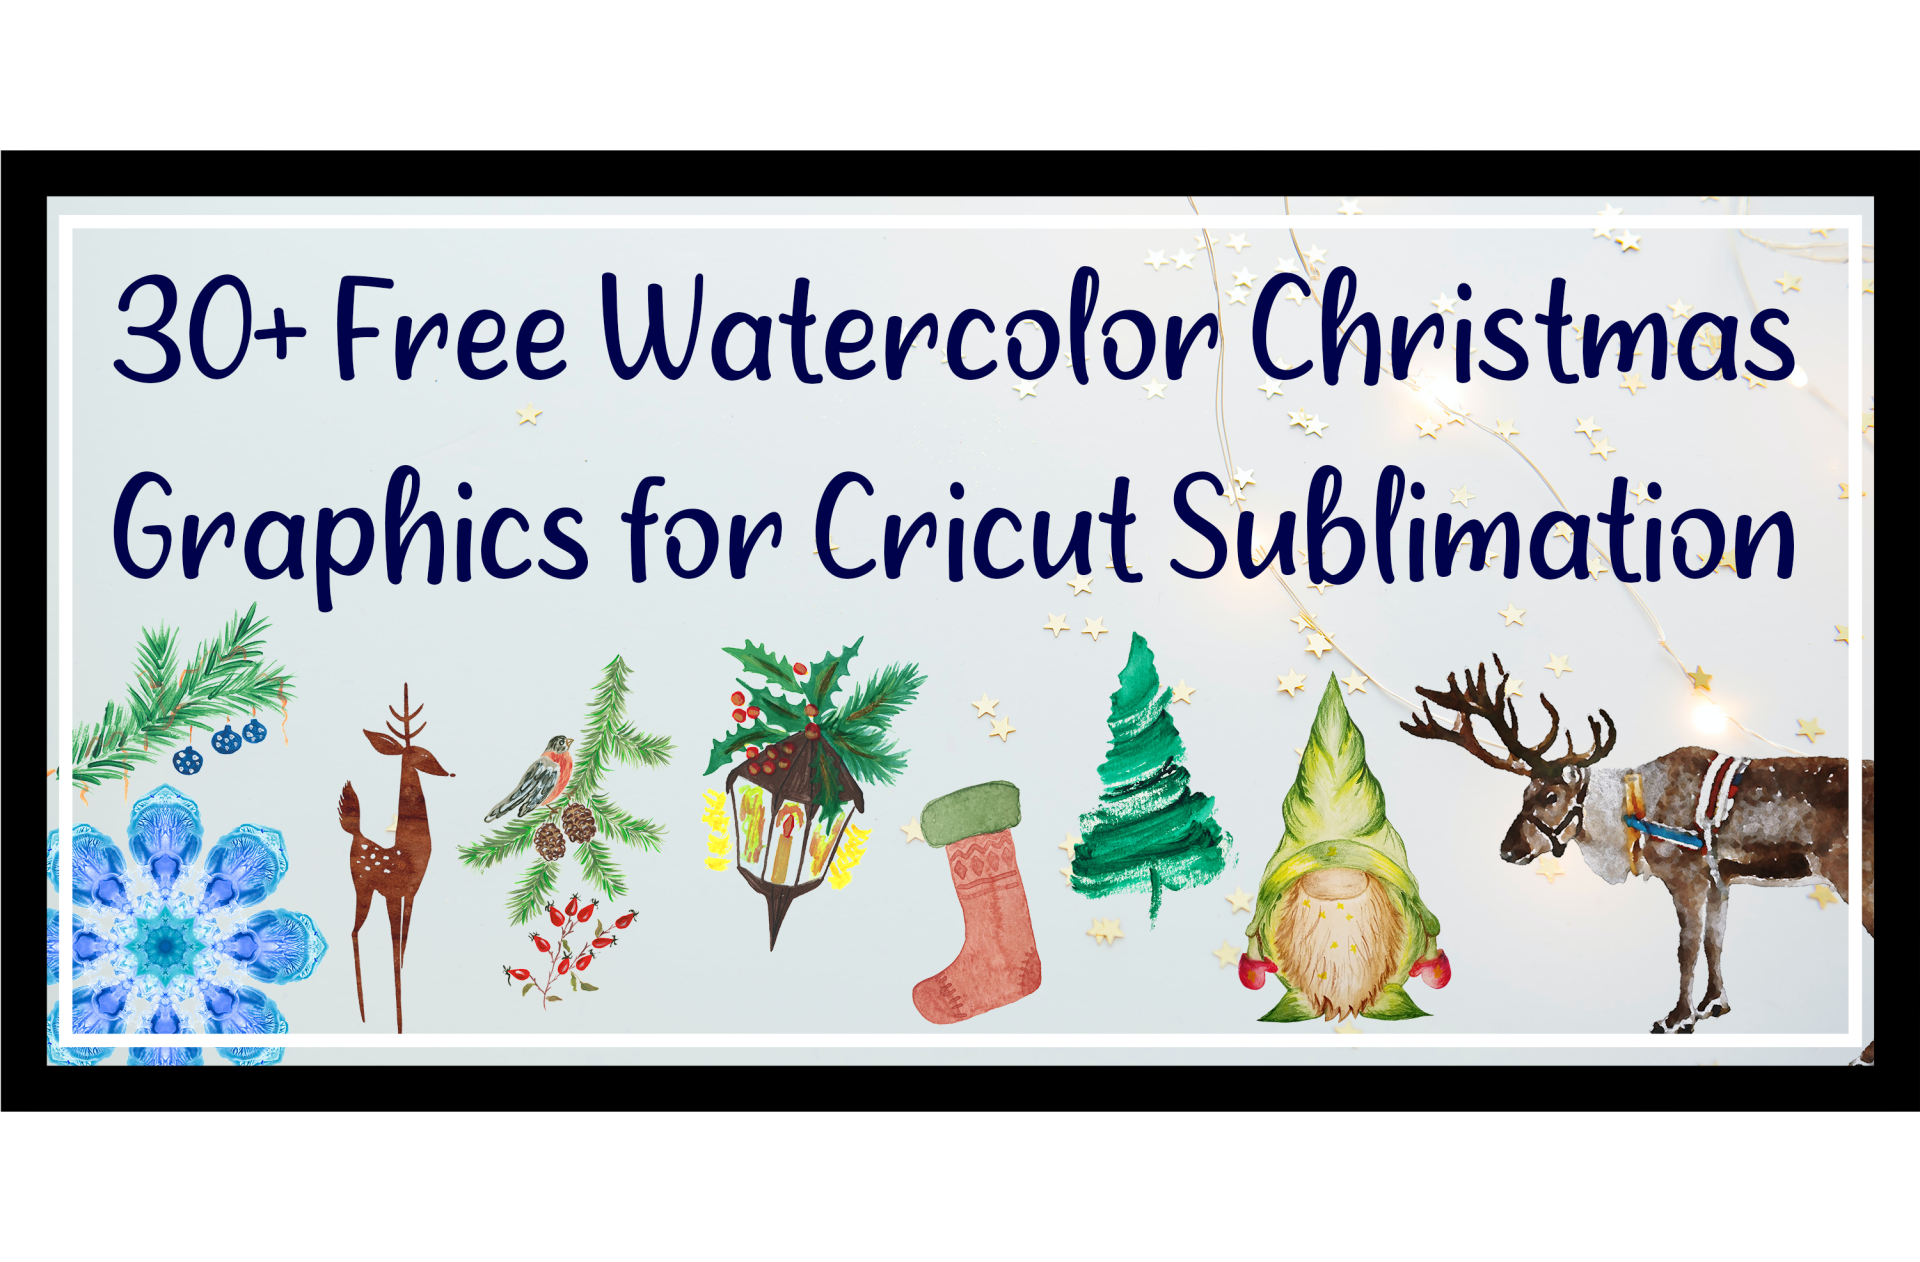 30+ Free Watercolor Christmas Graphics for Cricut Sublimation